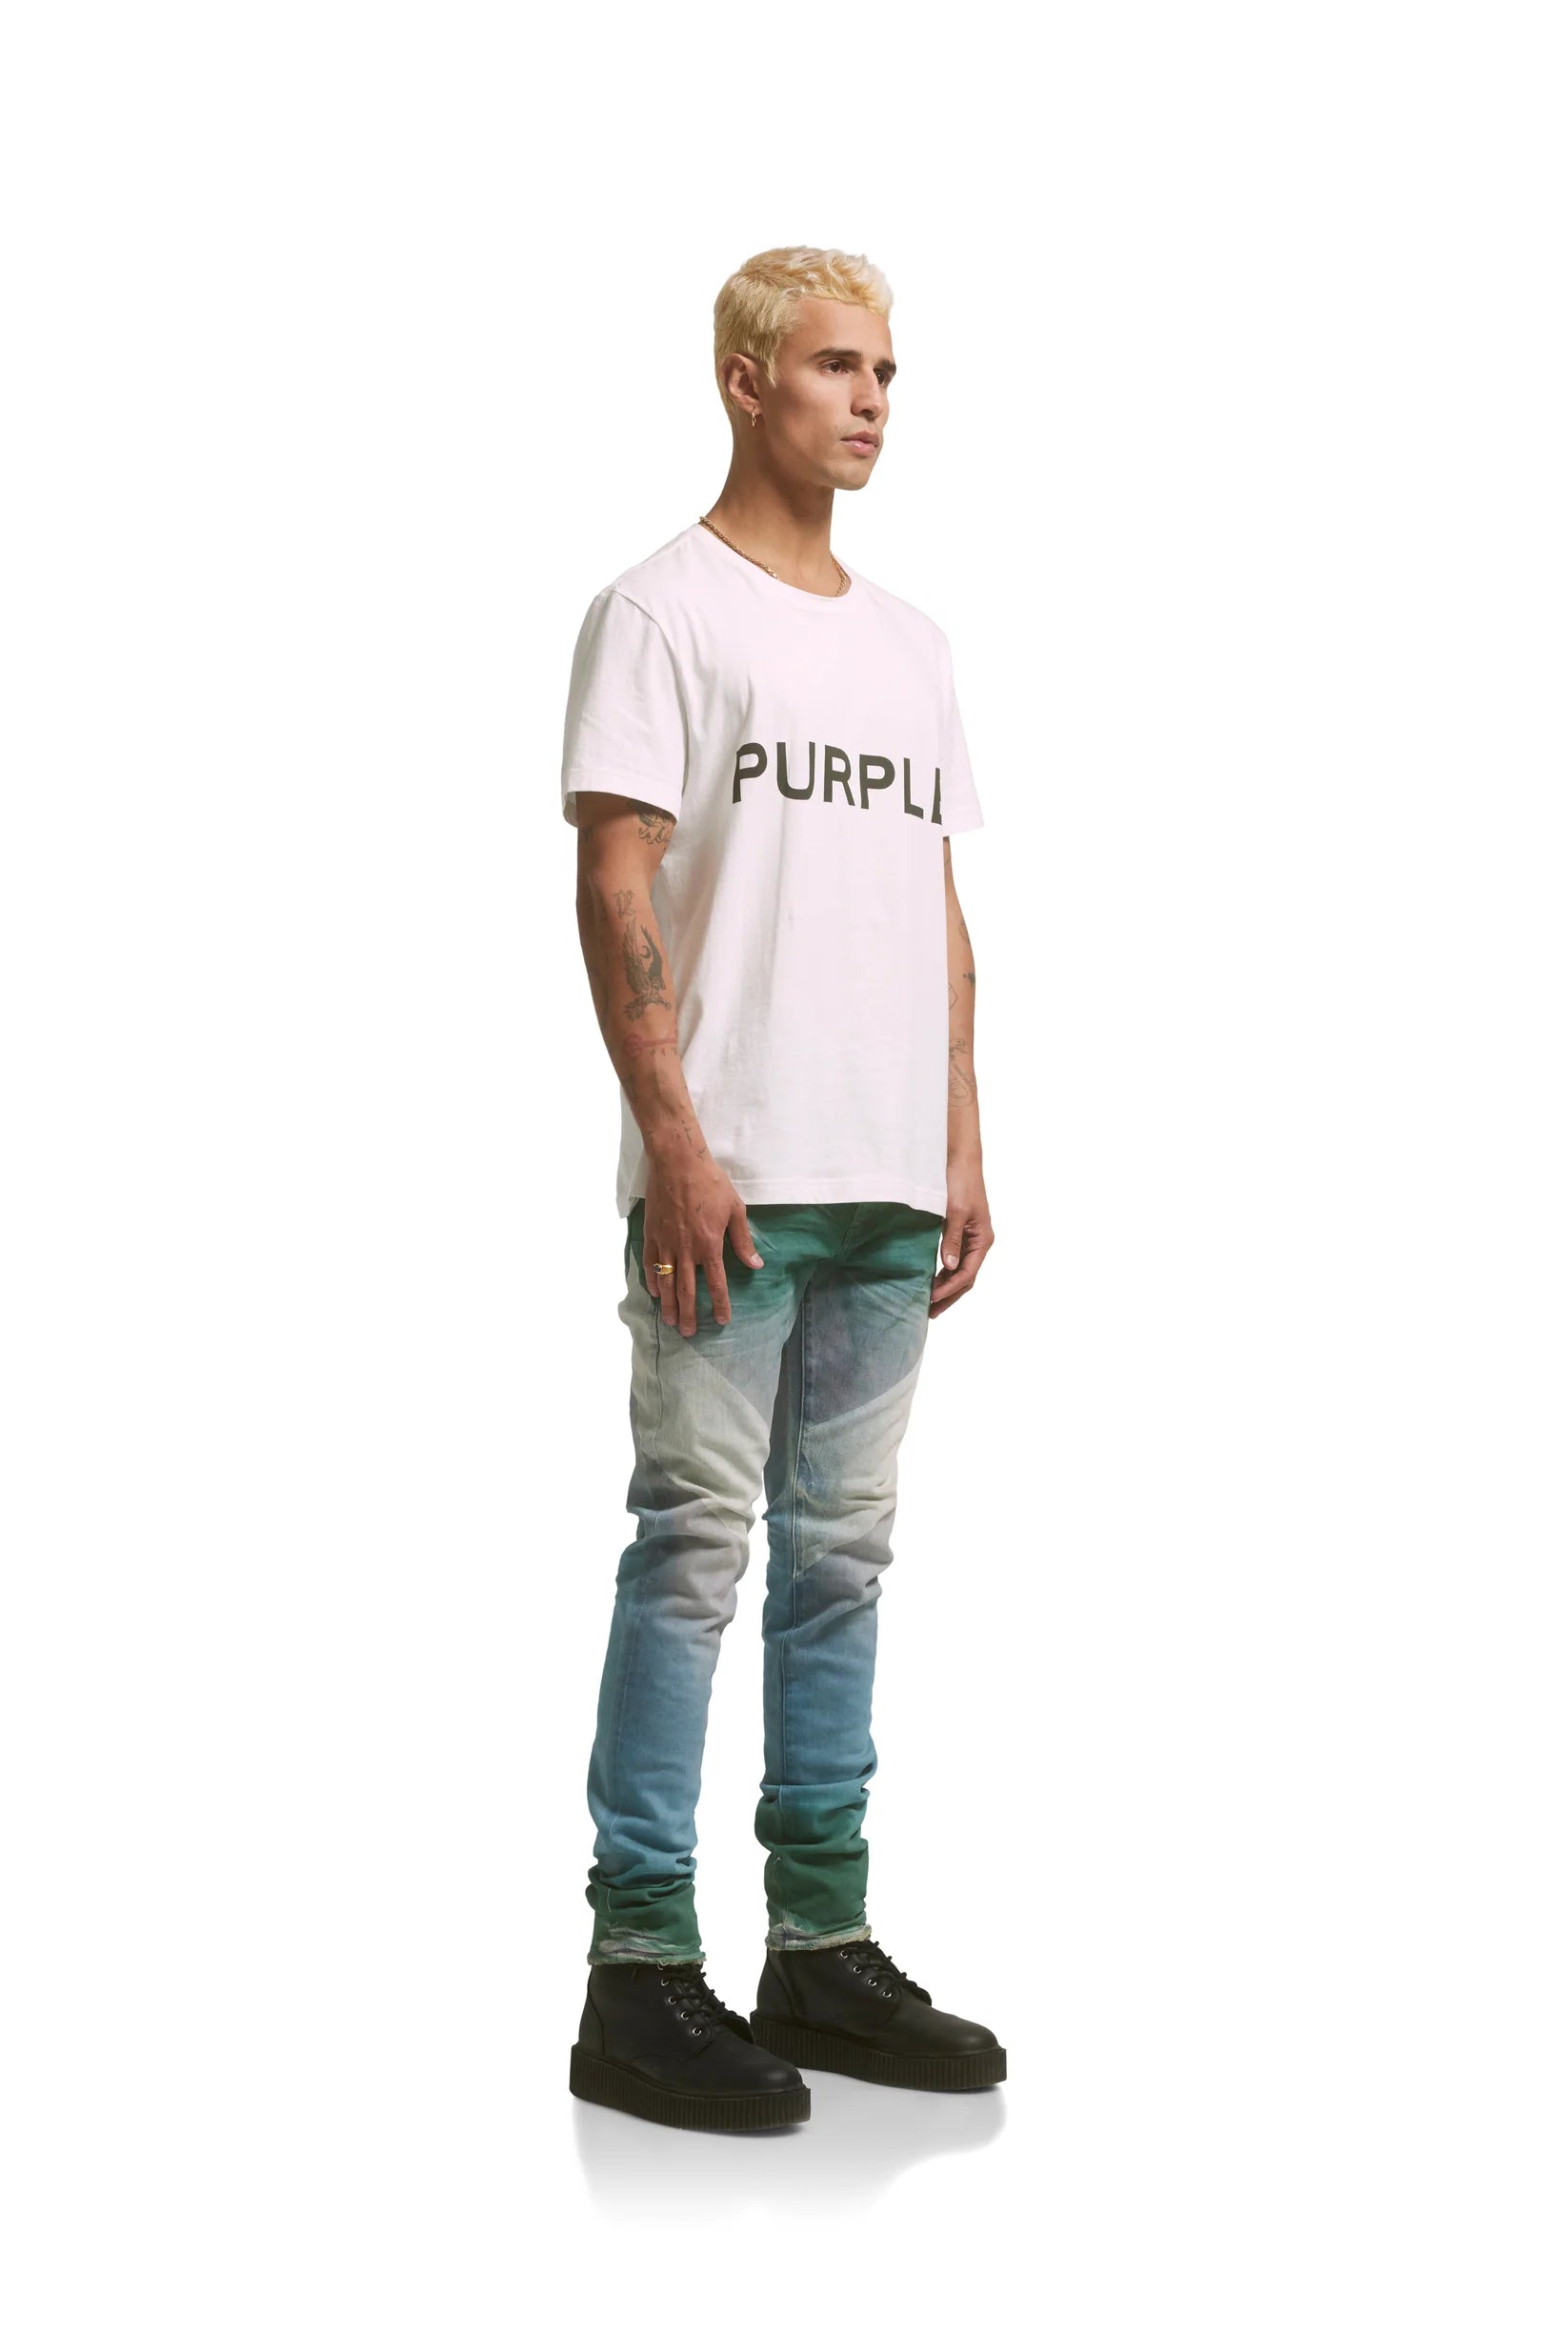 W2C Purple Brand Jeans. Been looking for so long, can't find w2c. Does  anyone know a reliable seller? Anything Purple Brand ; jeans, hoodie,  T-shirt, etc. : r/FashionReps